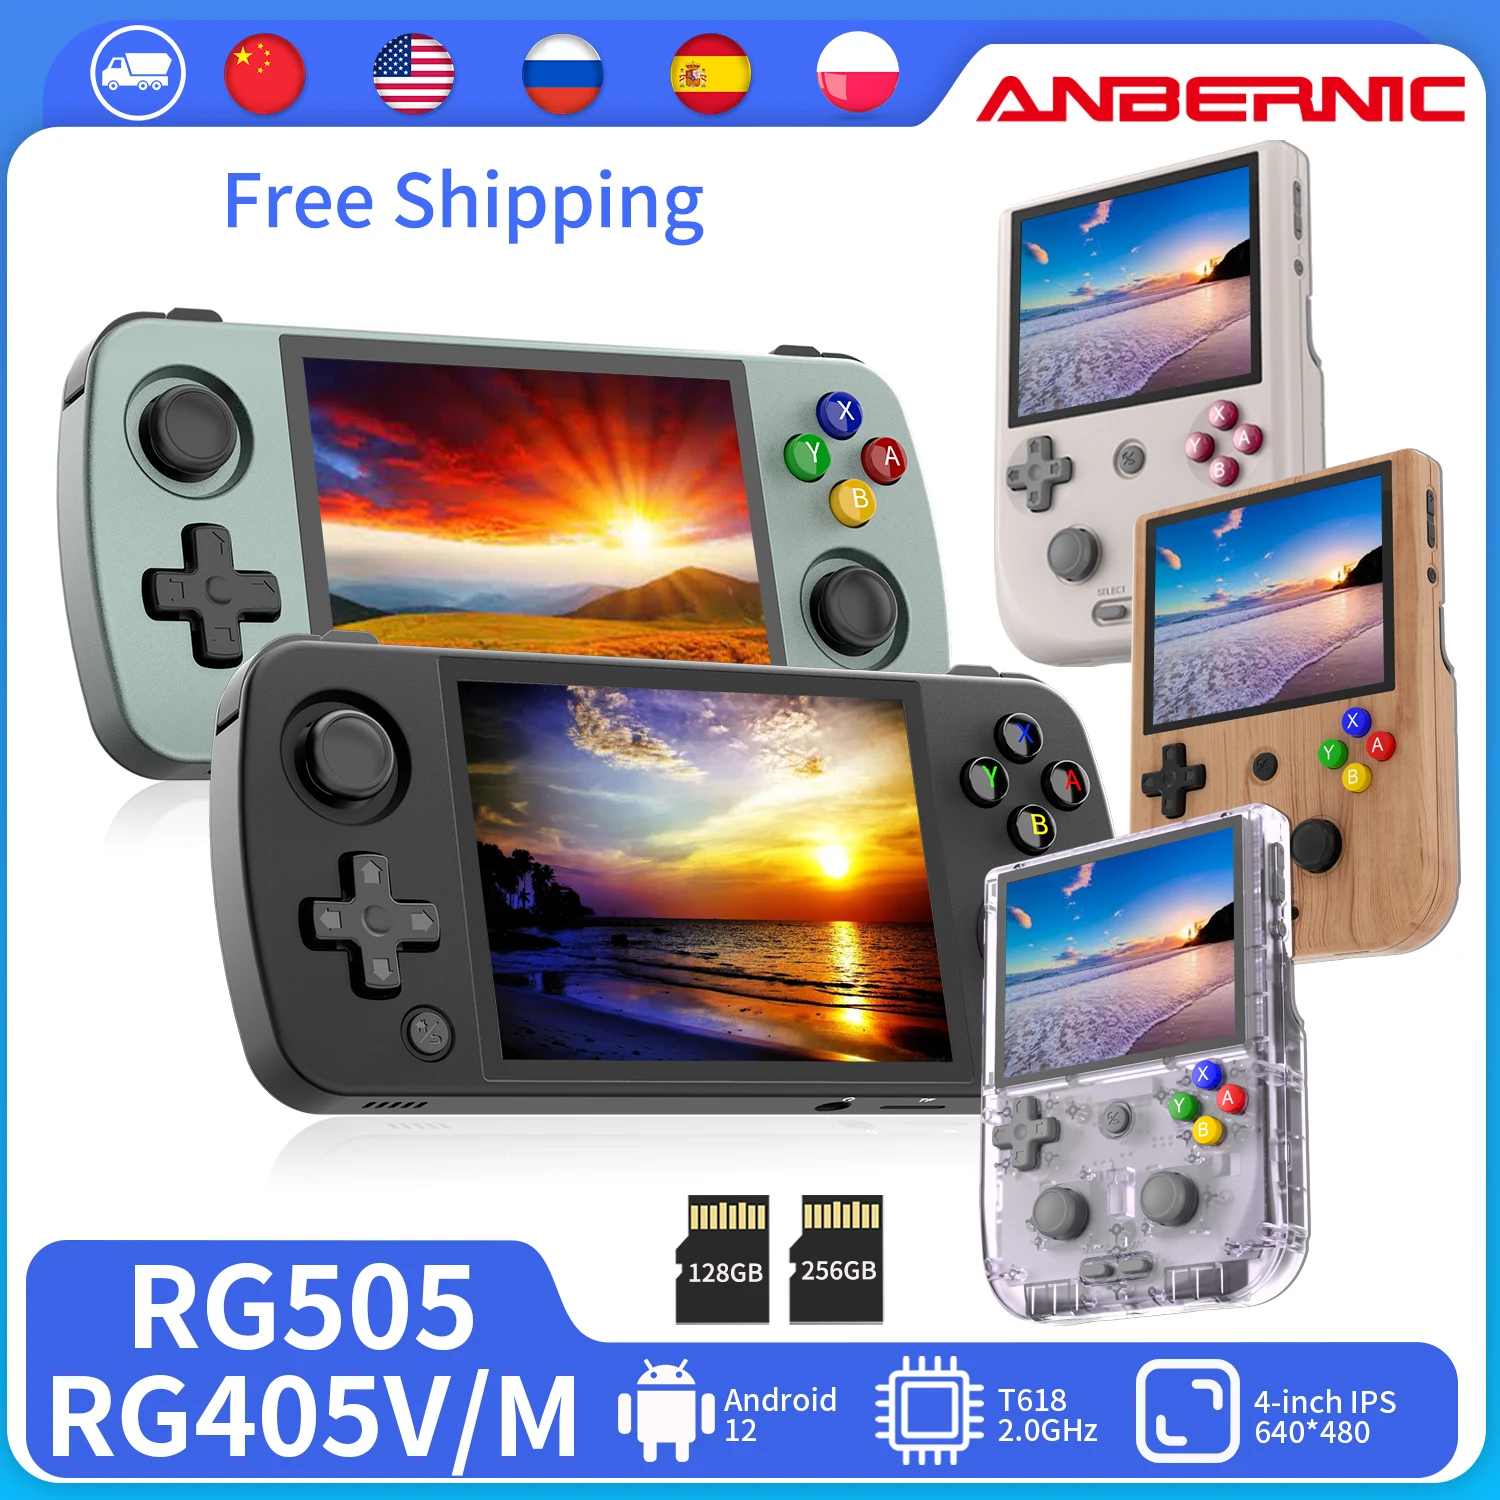 ANBERNIC RG405V Android12 4-inch IPS Video Portable Game Player T618 OTA  upgrade